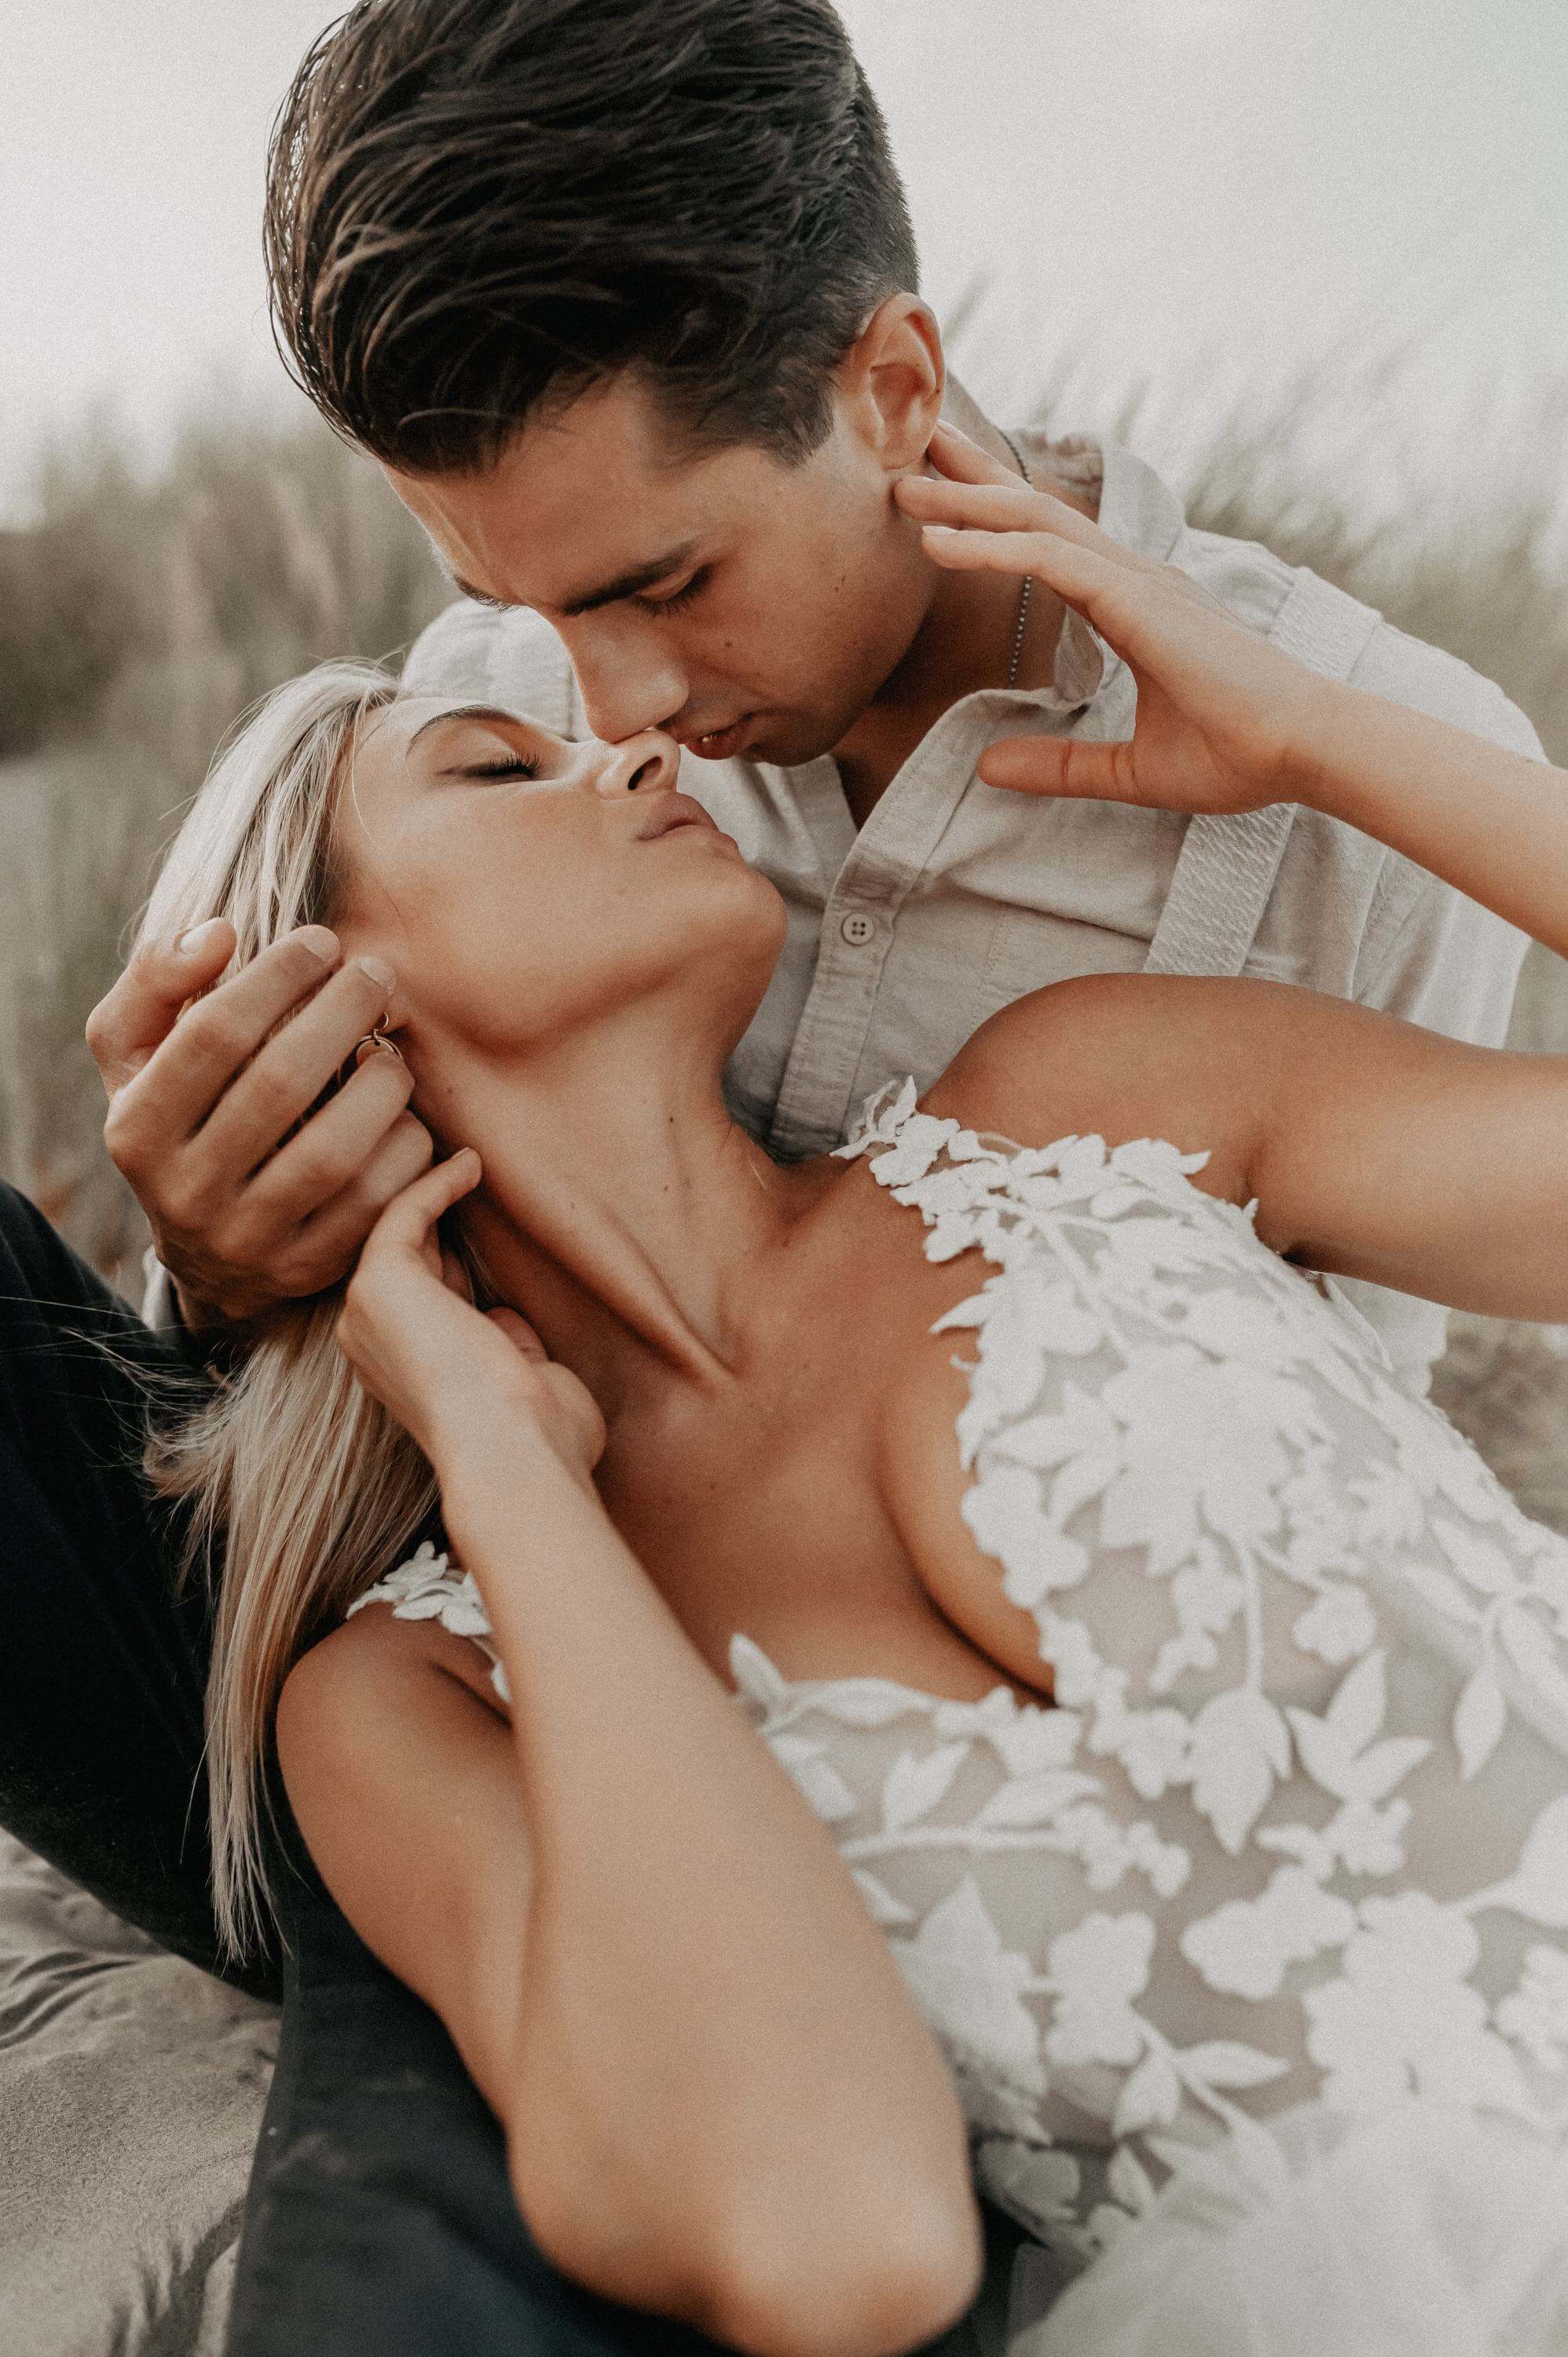 A woman in a wedding dress lies on the lap of her man in a vintage linen shirt during an after-wedding shoot on the beach. Both look deep into each other's eyes while showing off her deep, sexy cleavage.